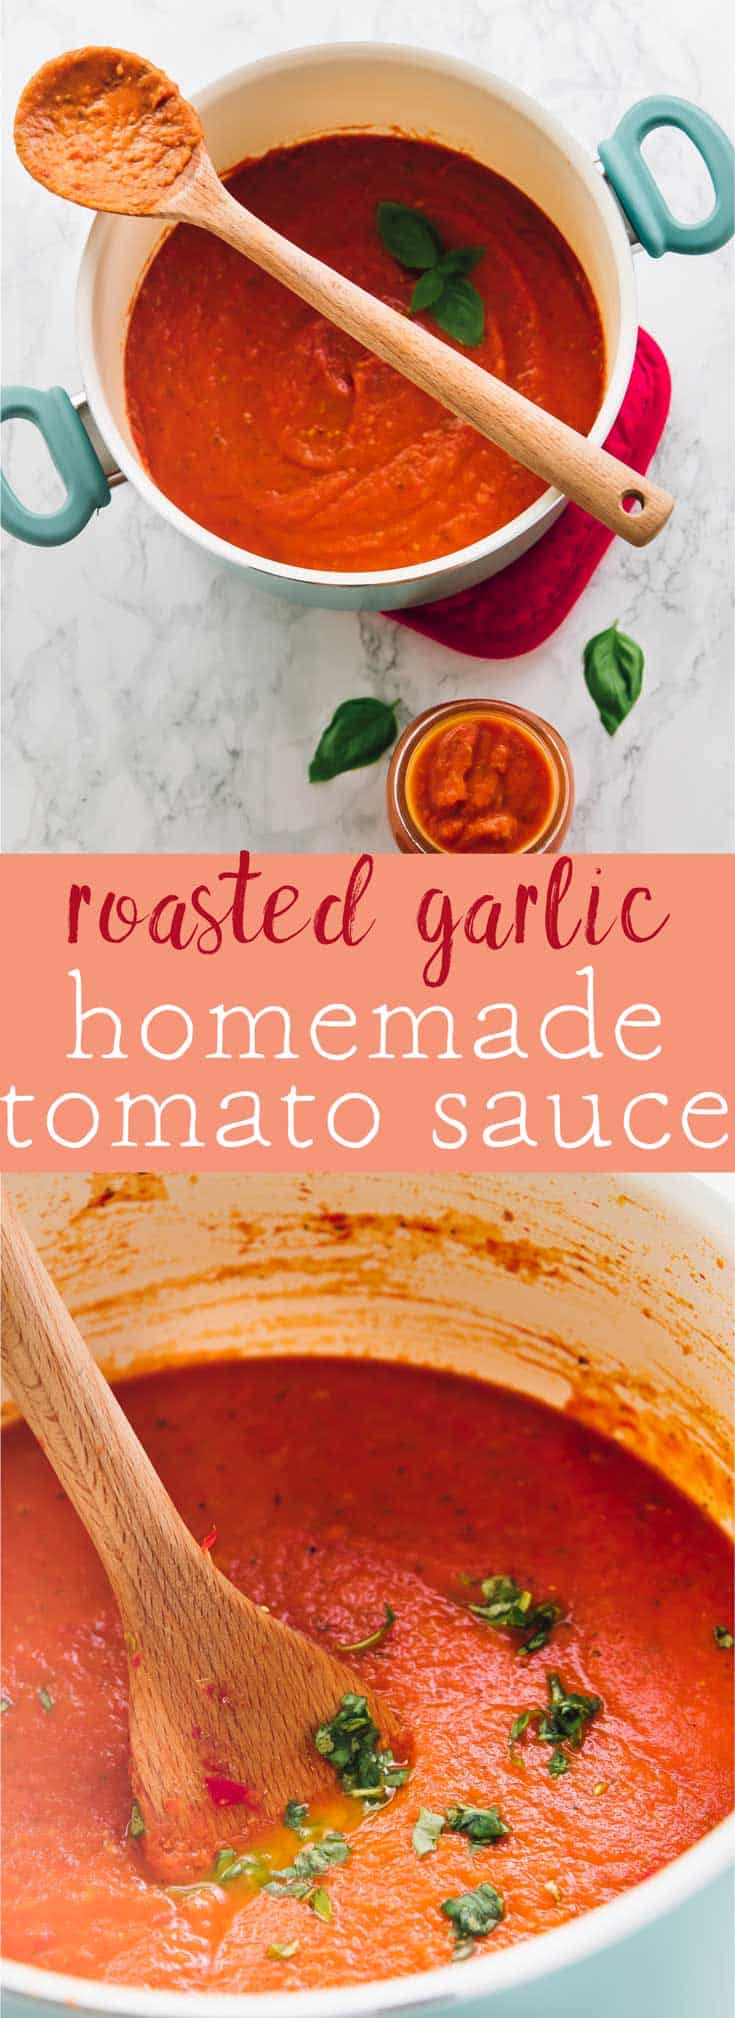 Learn how to make incredibly easy homemade tomato sauce, then use it in everything!! It's taken up an extra notch with the addition of divine homemade garlic. Your kitchen will smell heavenly!